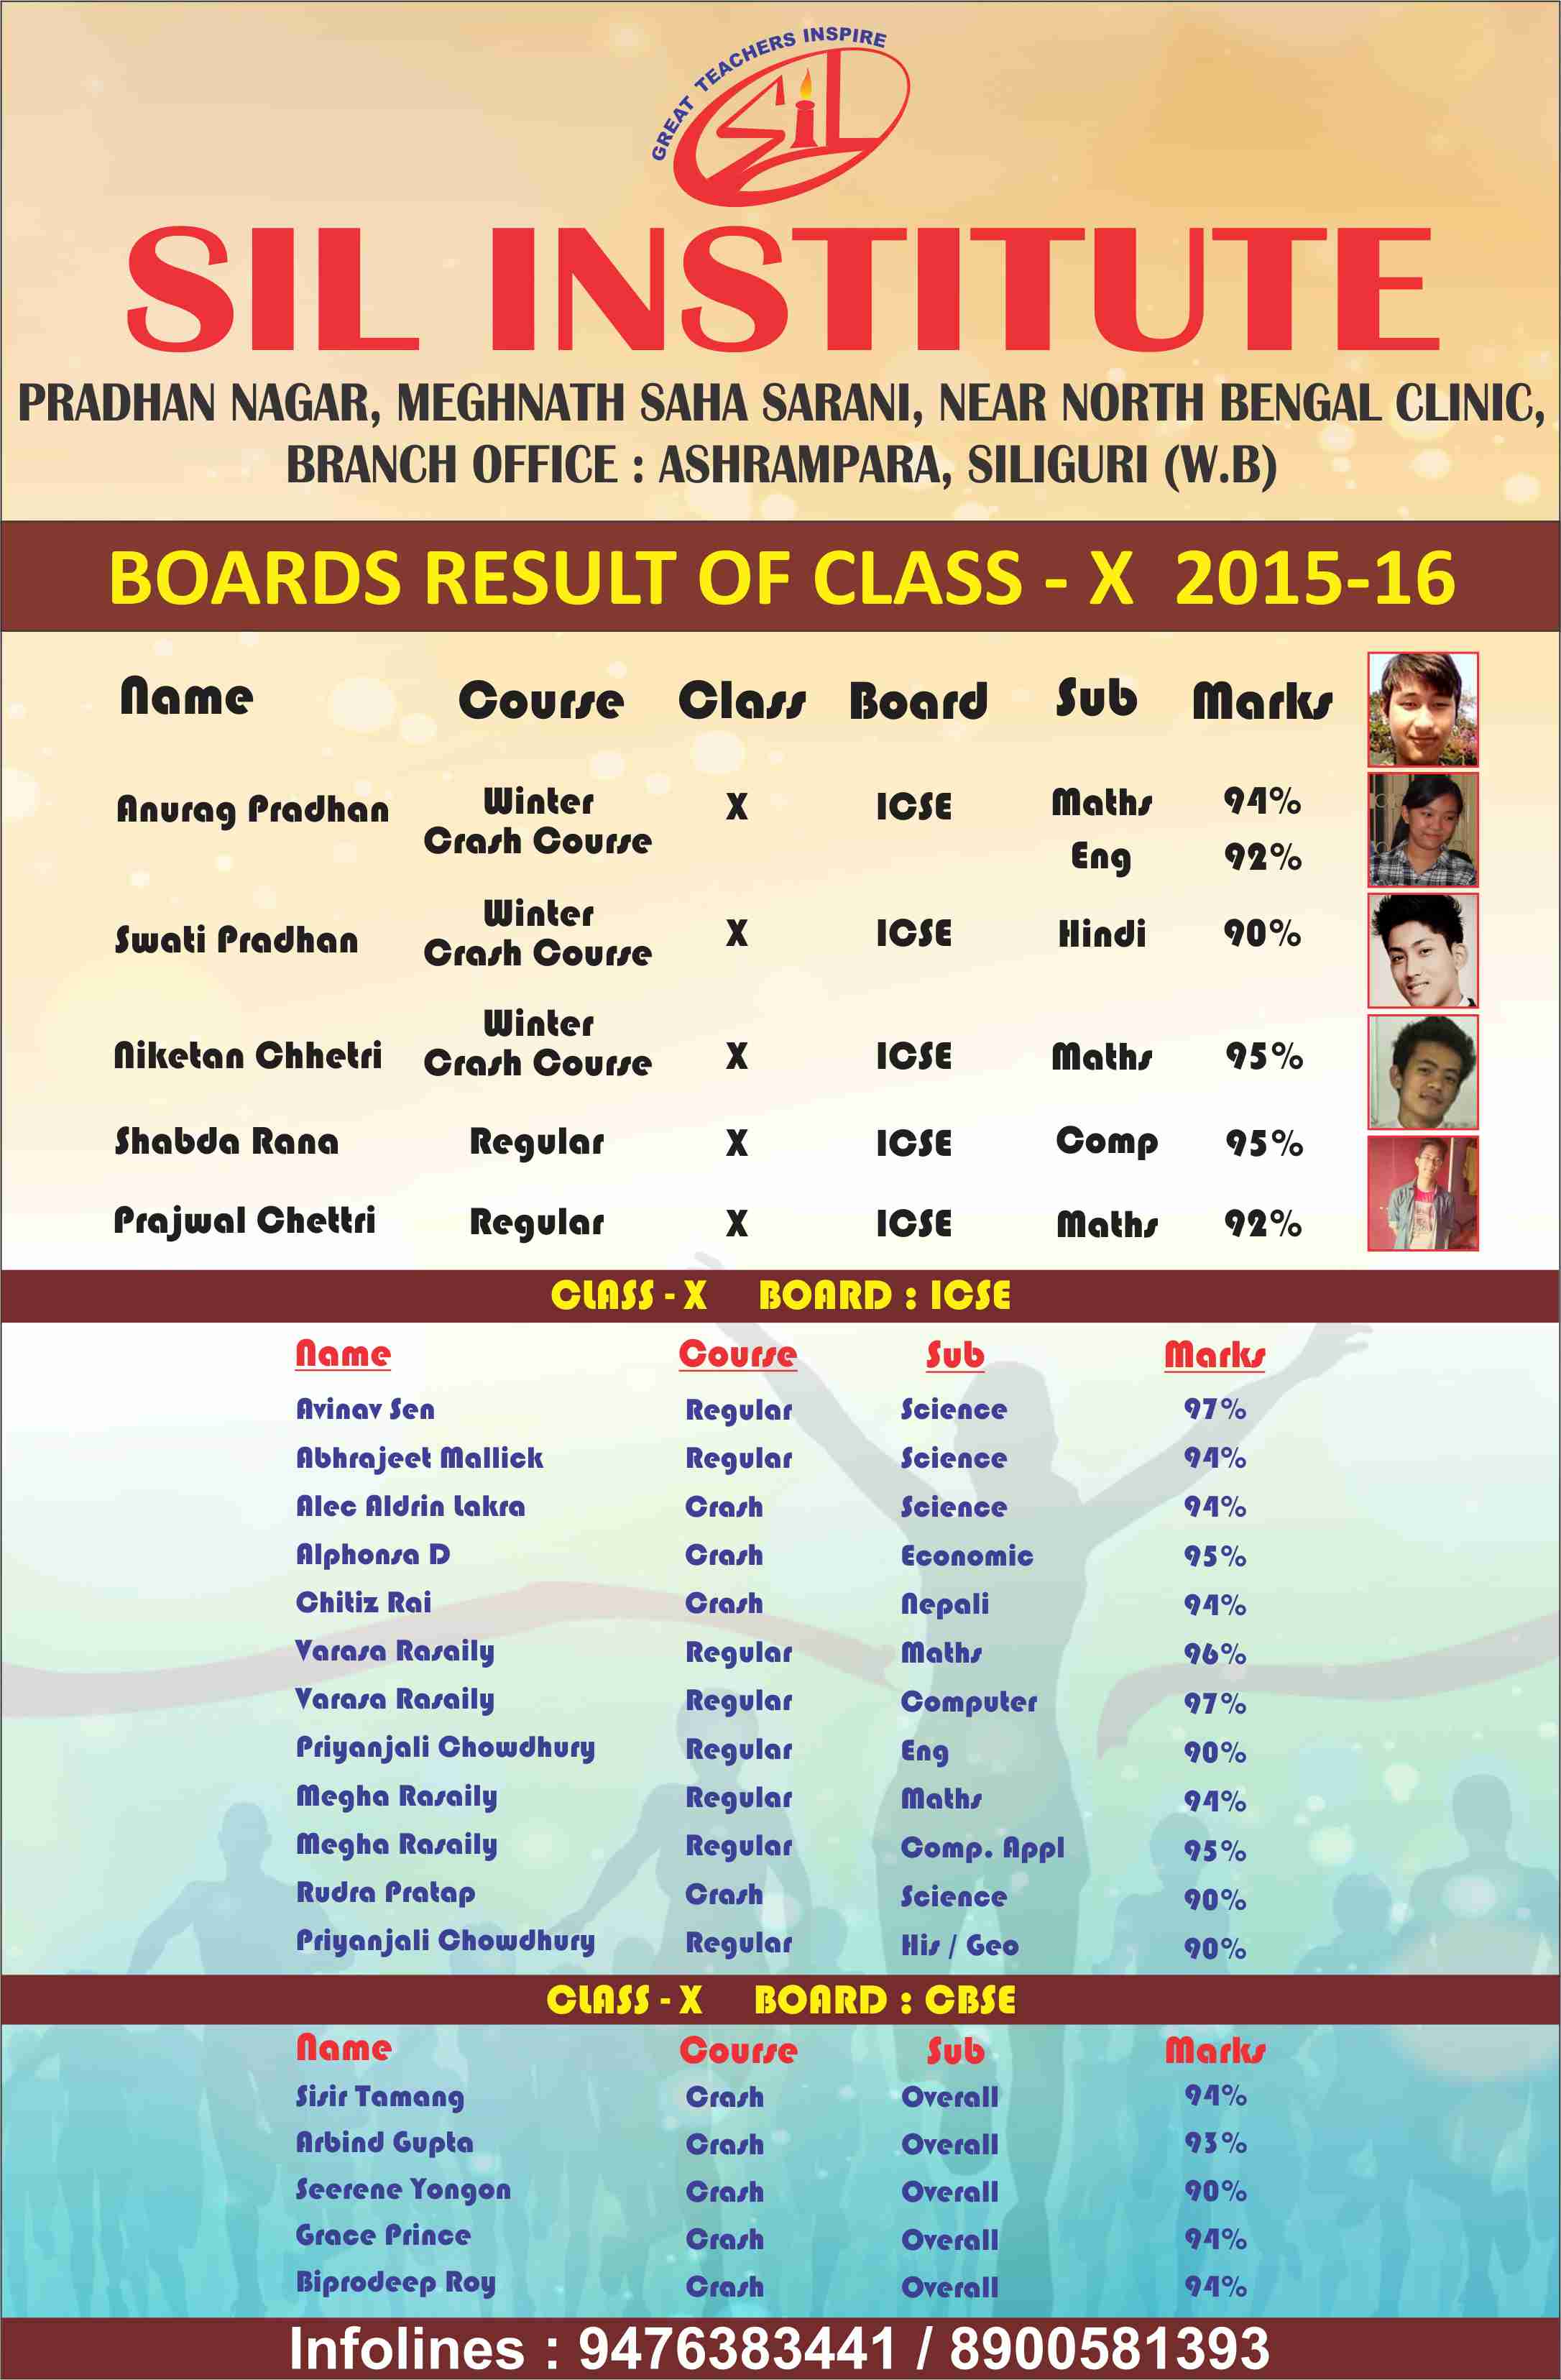 Boards Result of Class X 2015 & 2016